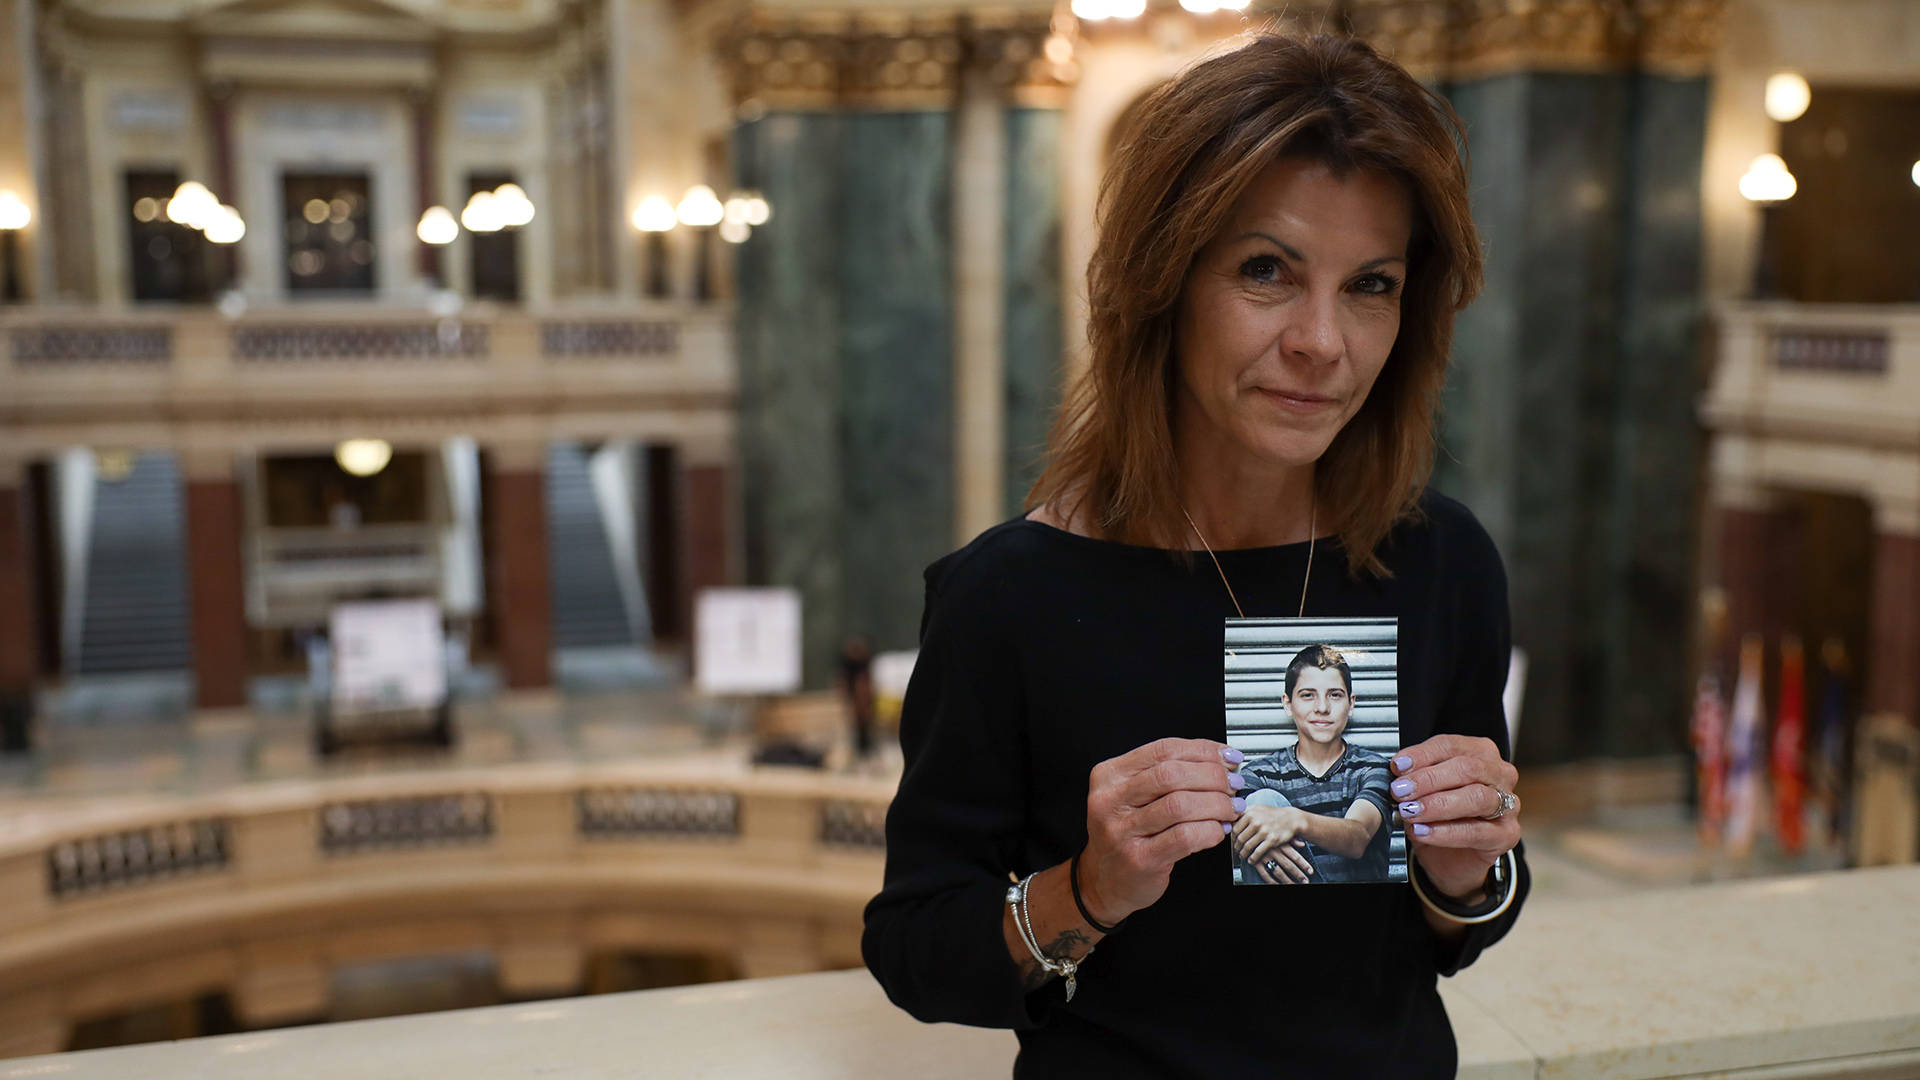 Sheila Lockwood poses for a portrait while holding a printed portrait of her son while standing at a marble railing overlooking a multiple levels rotunda, with walkways, stairs marble pillars and lights in the background.